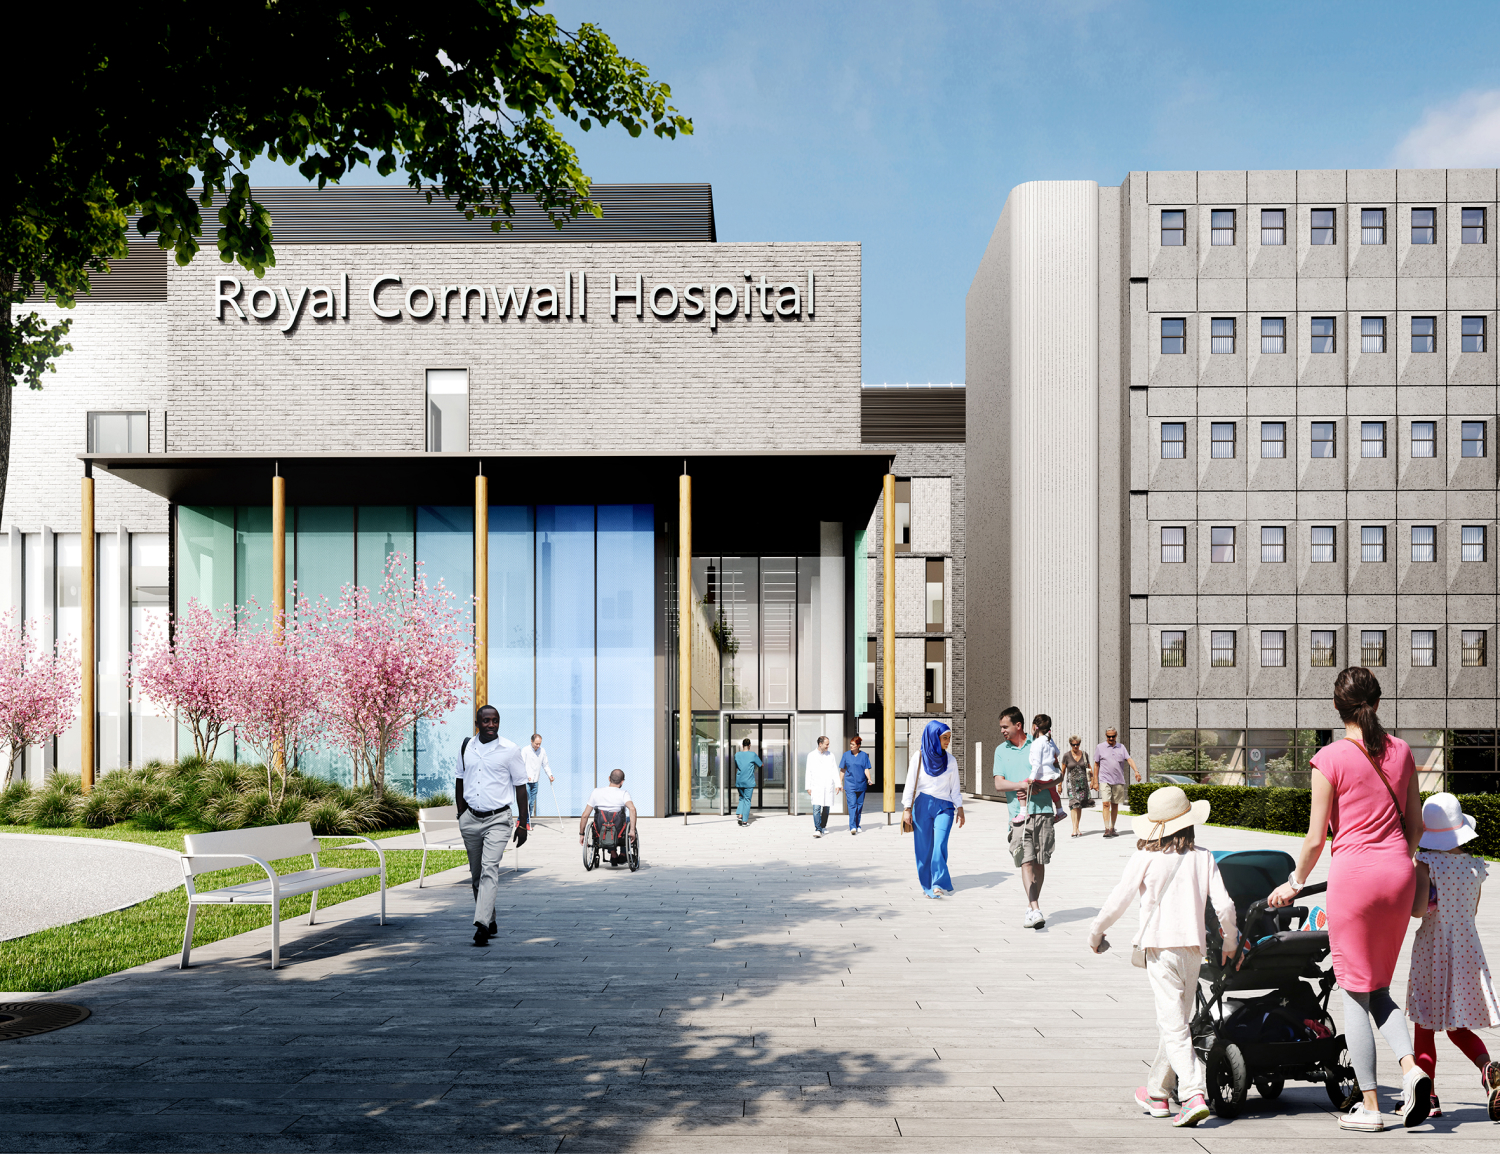 Caring for your plaster cast  Royal Cornwall Hospitals NHS Trust